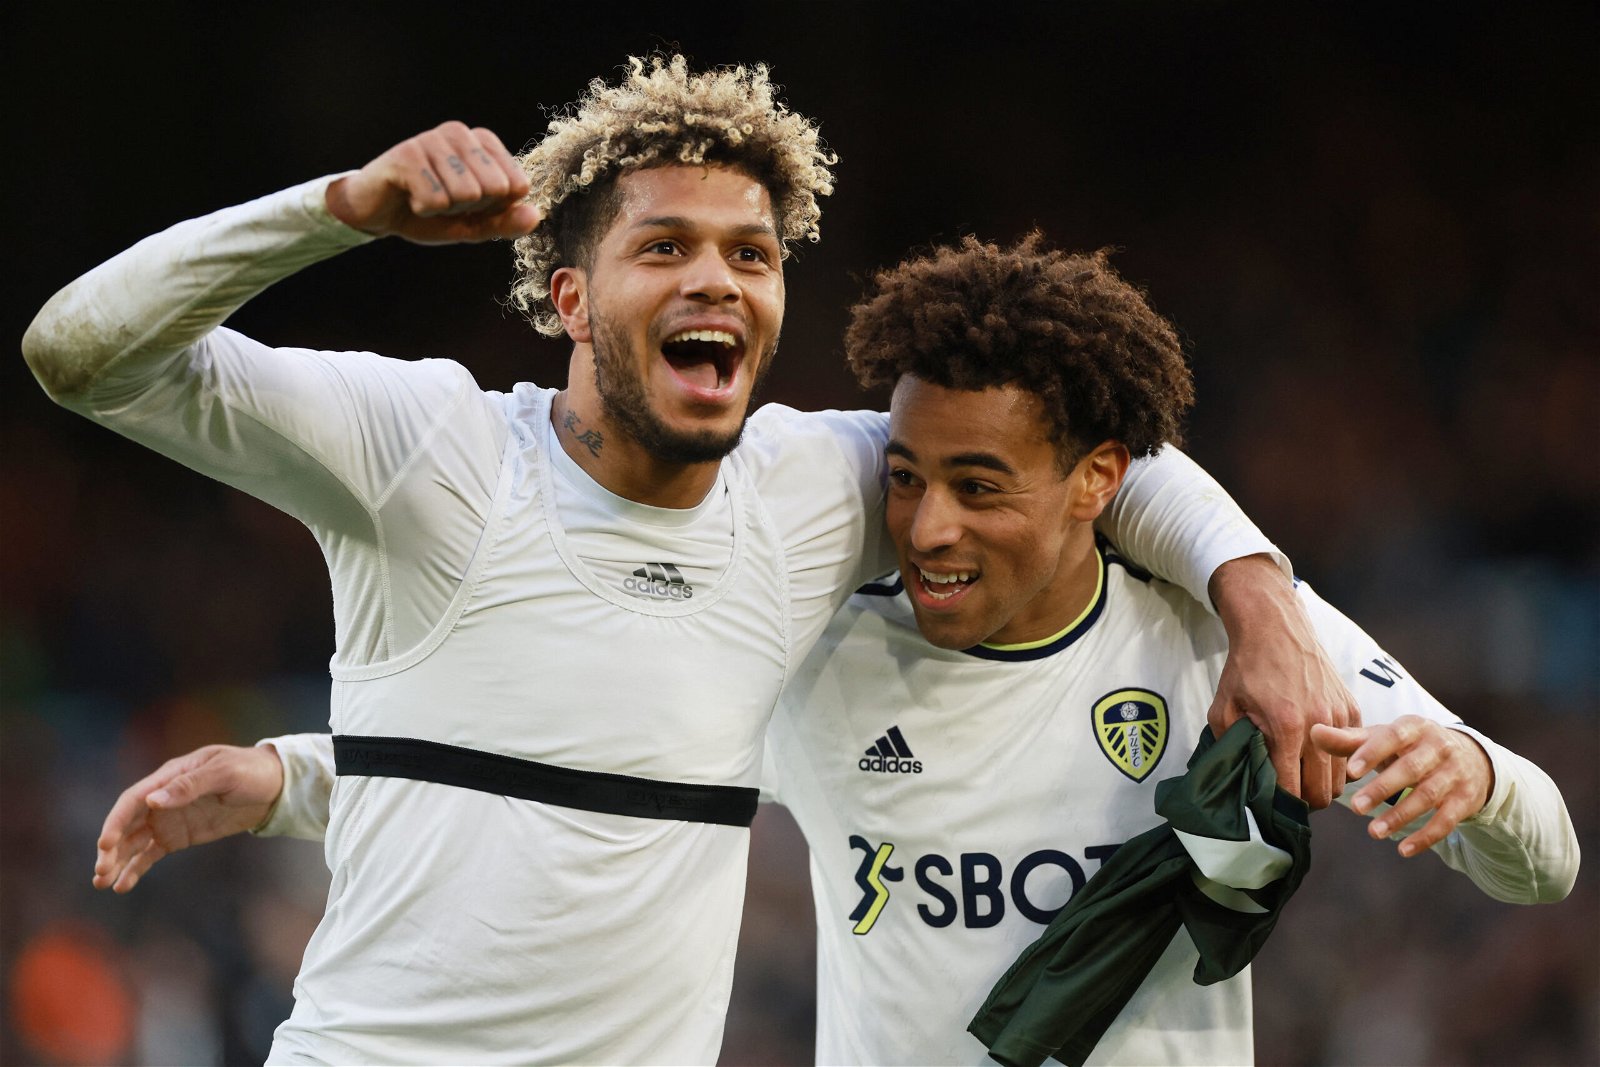 Leeds United's Georginio Rutter and Tyler Adams celebrate after the match